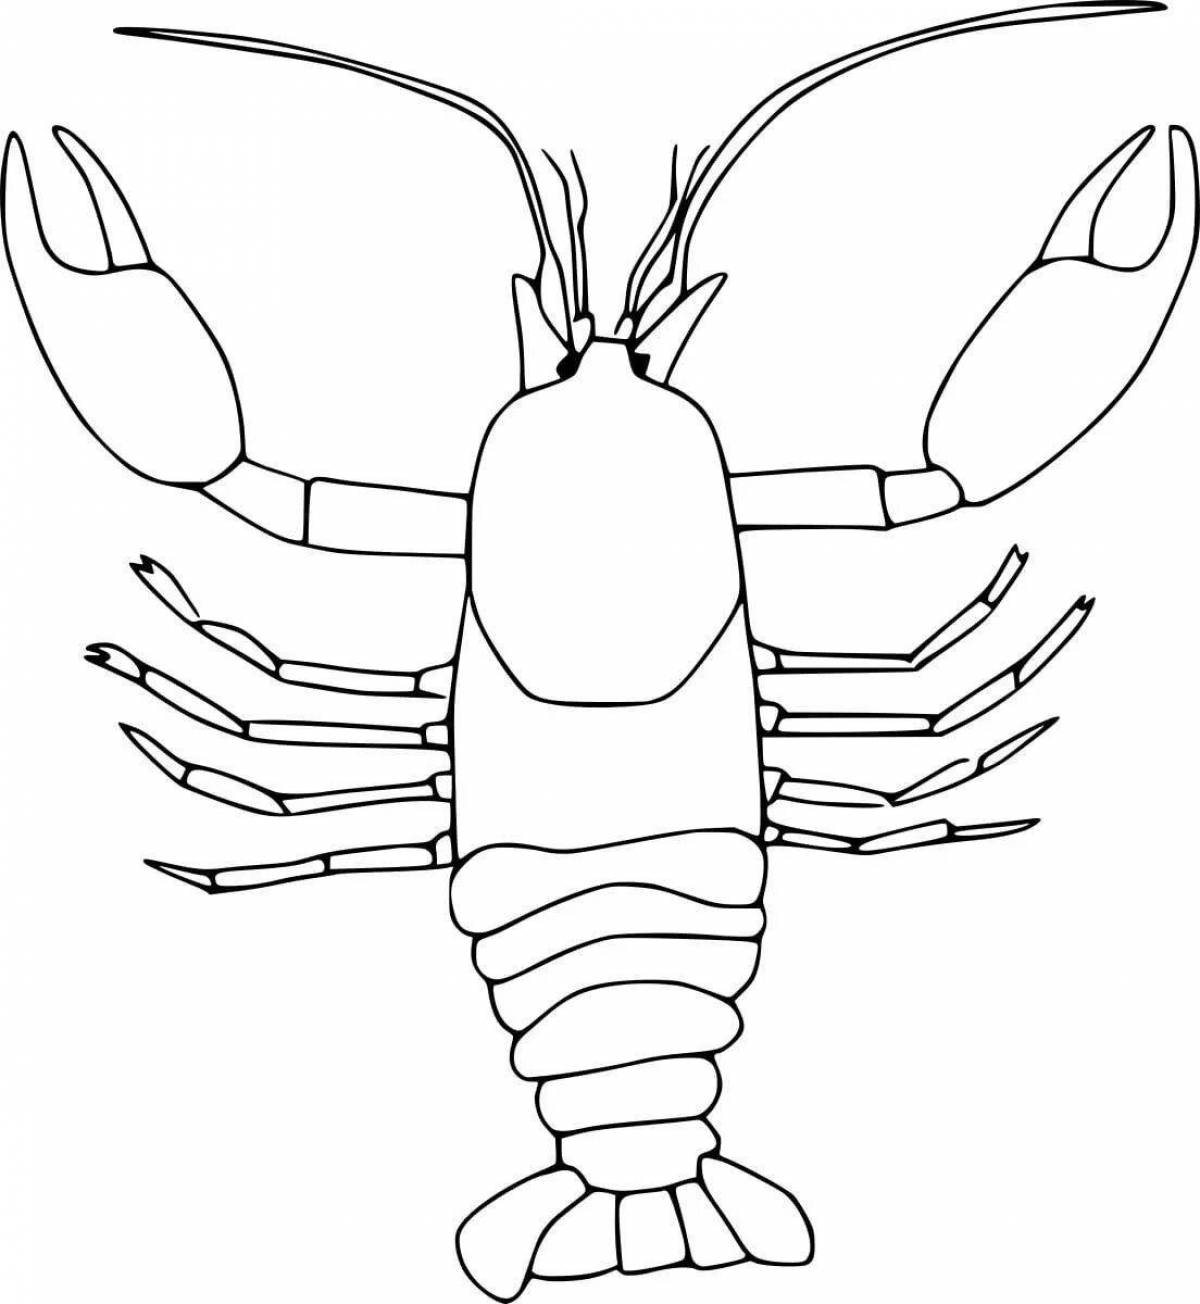 Coloring book shiny lobster